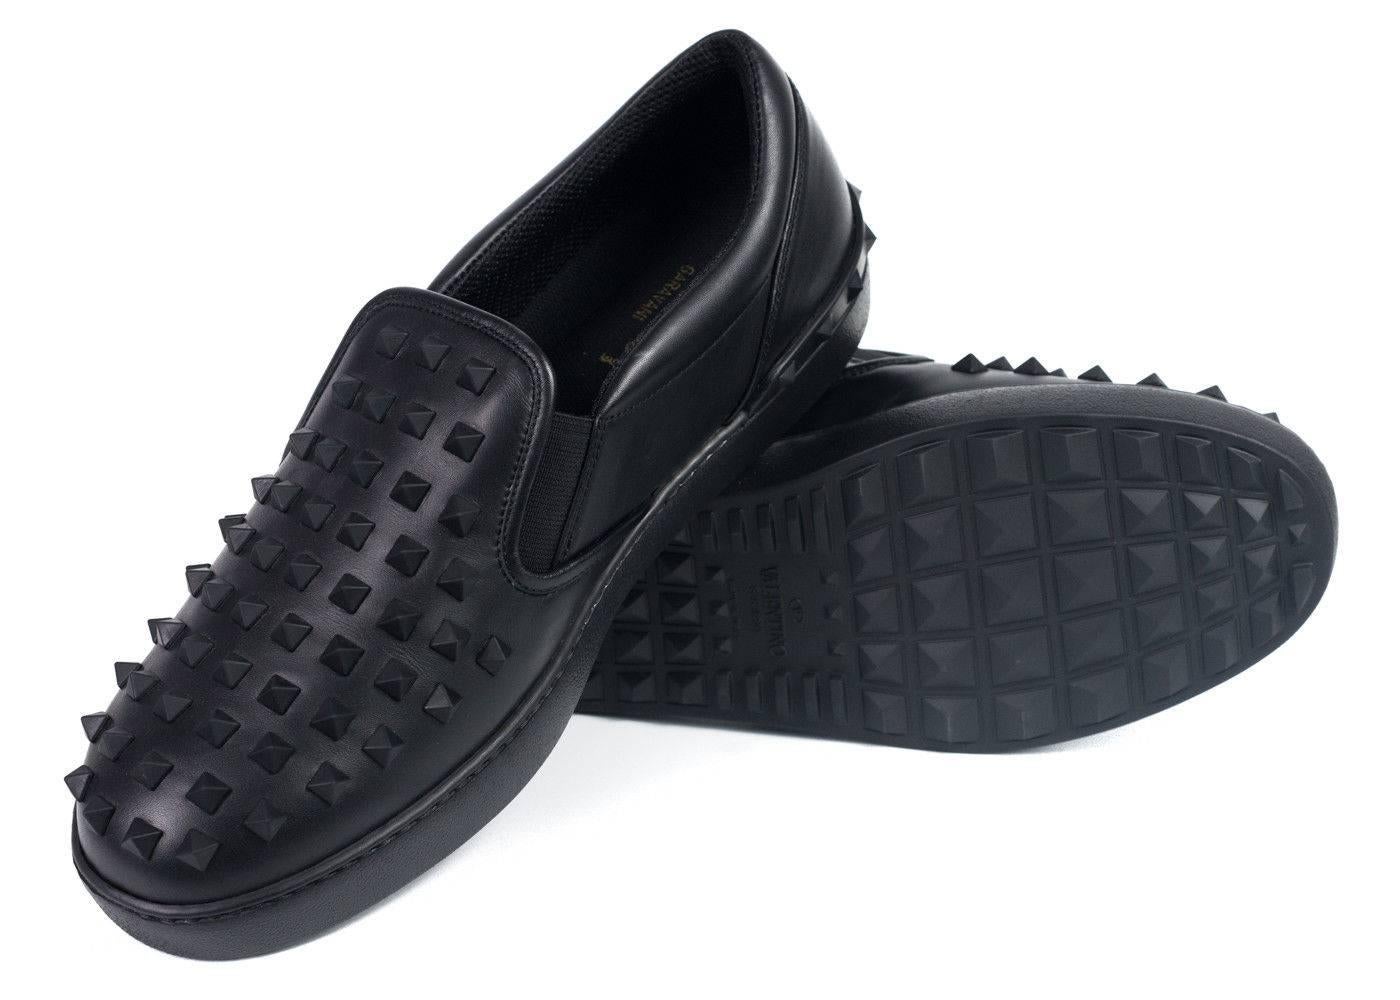 Brand New Valentino Rockstud Slip On Sneakers
Original Tags and Dust Bag Included
Retails in Stores & Online for $1155
Men's Size EUR 45/ US 12 Fits True to Size

The Valentino Rockstud sneakers are the ideal slip-ons. These pure leather